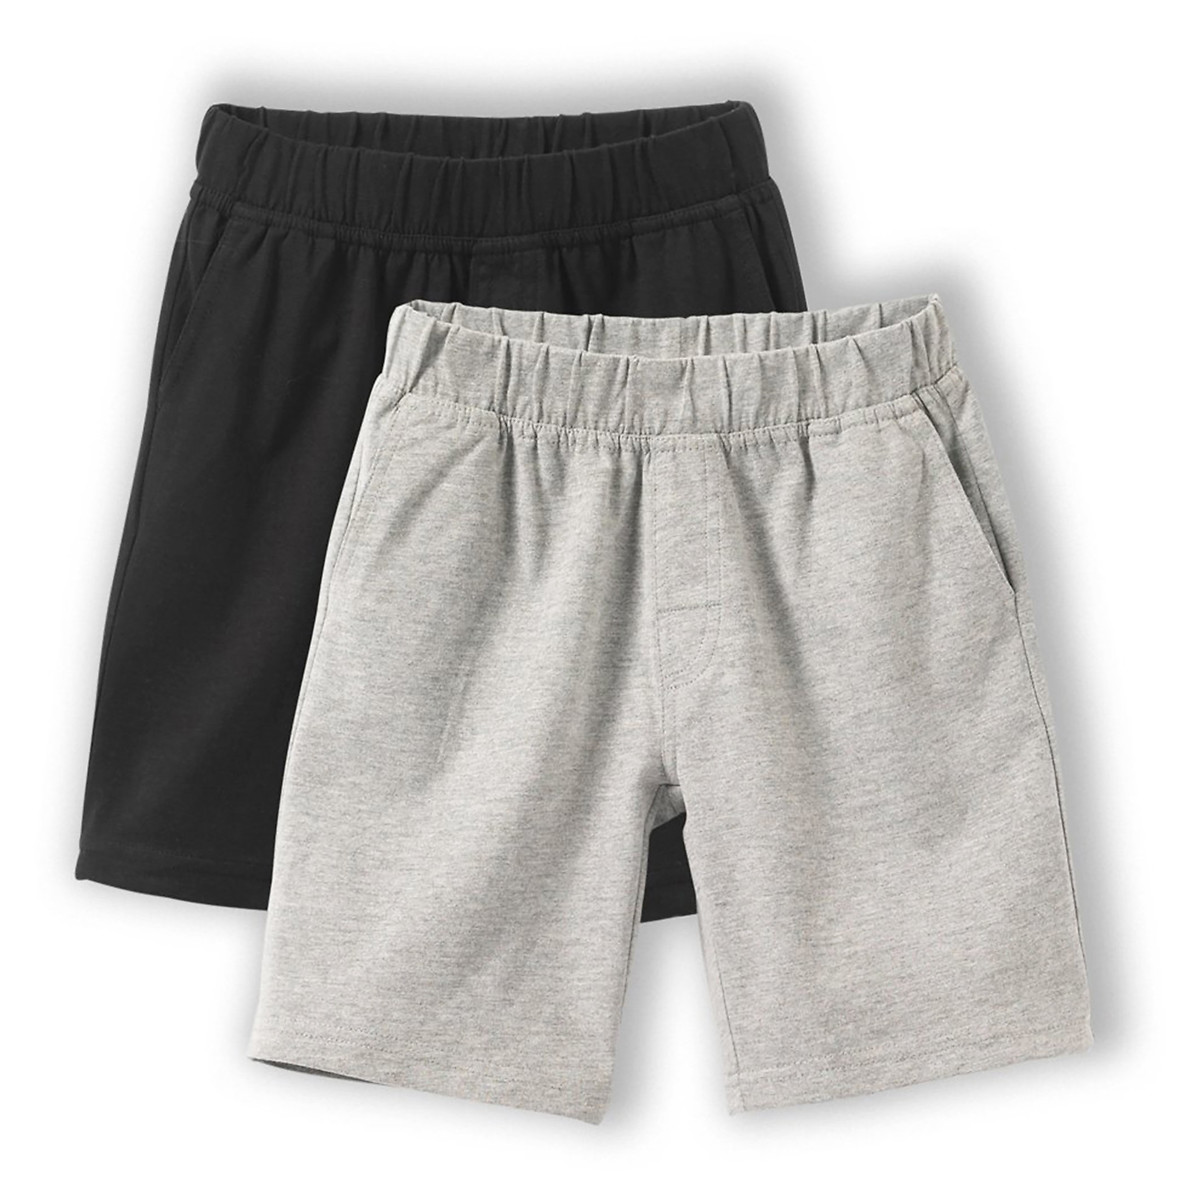 3-12 Years La Redoute Collections Big Boys Pack of 2 Shorts 